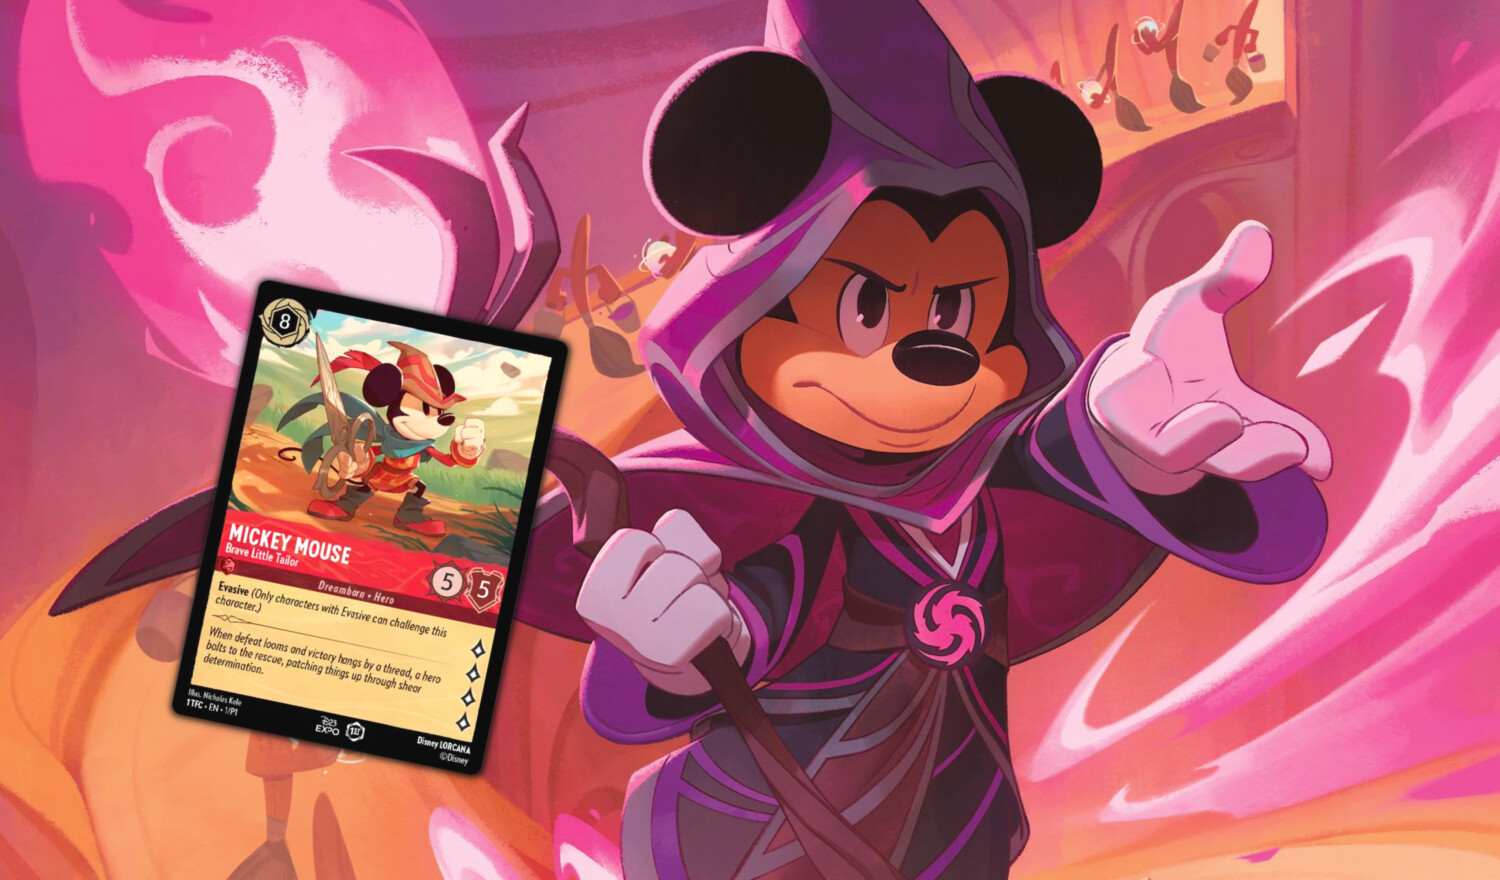 Disney's Move Into Trading Cards The Hustle, 54% OFF